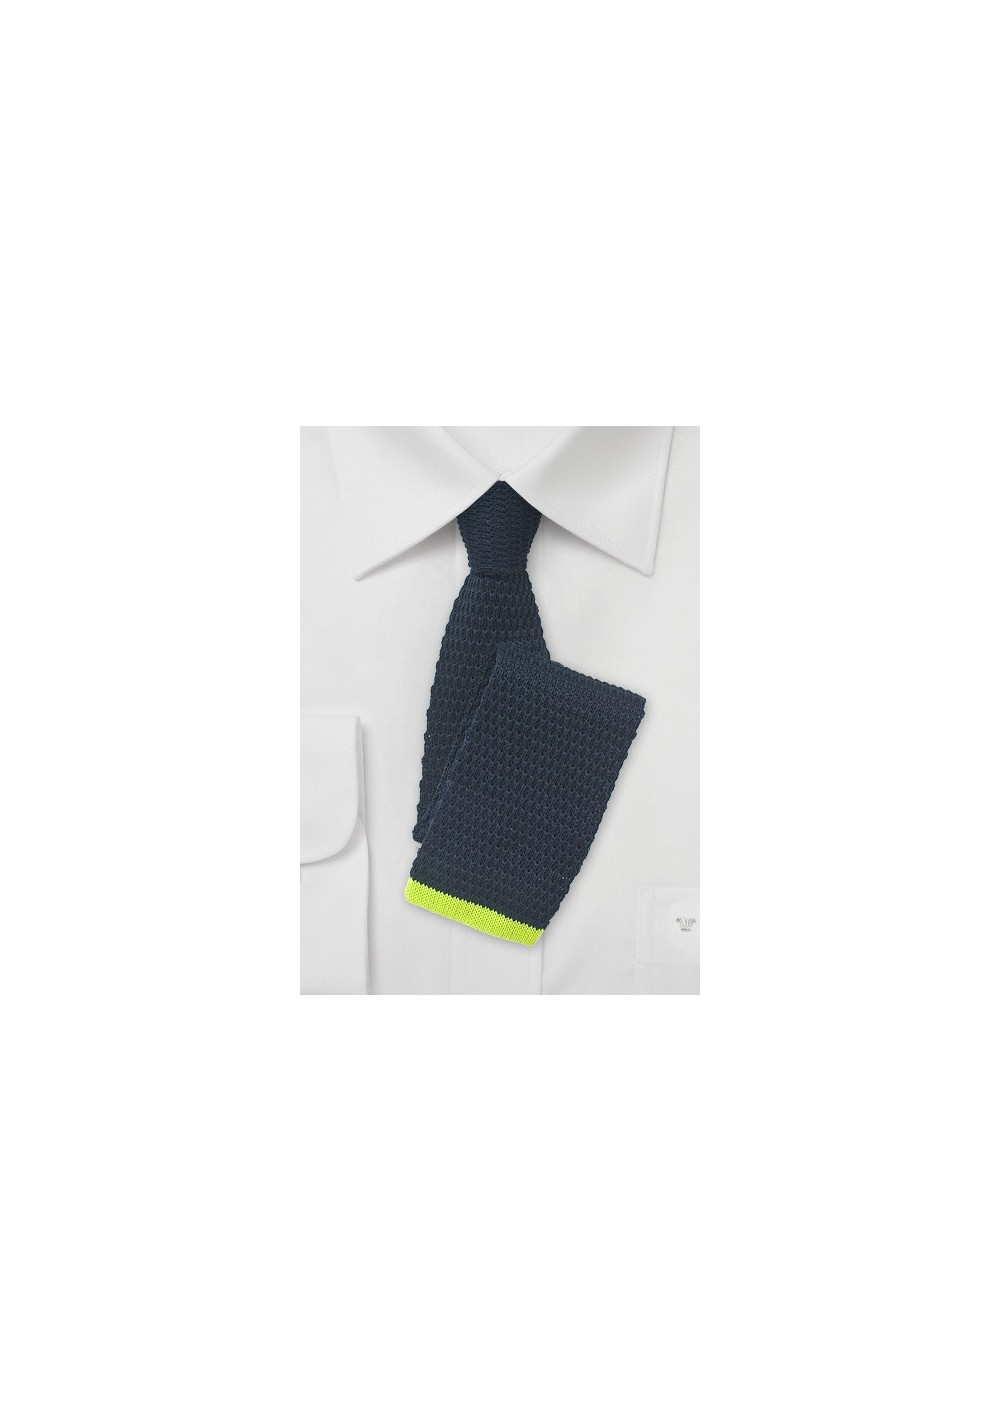 Navy Blue Knit Tie with Lime Green Tip